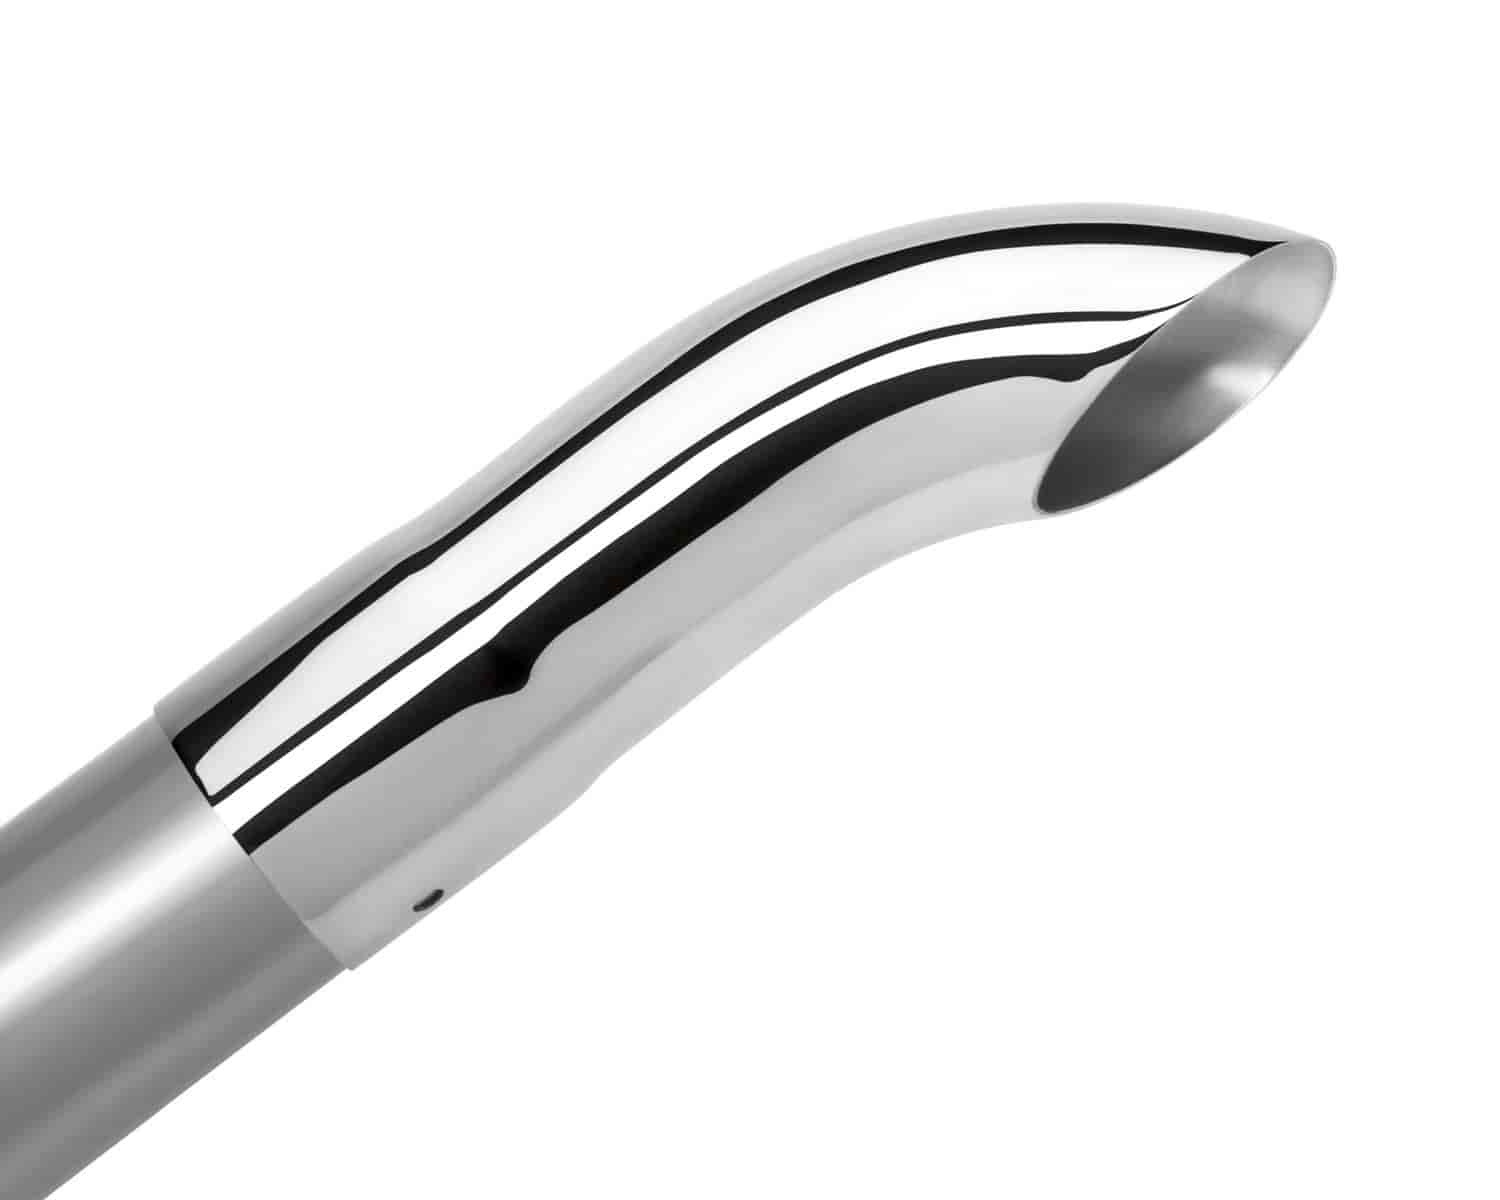 Stainless Steel Exhaust Tip Outlet Size: 2-1/4"